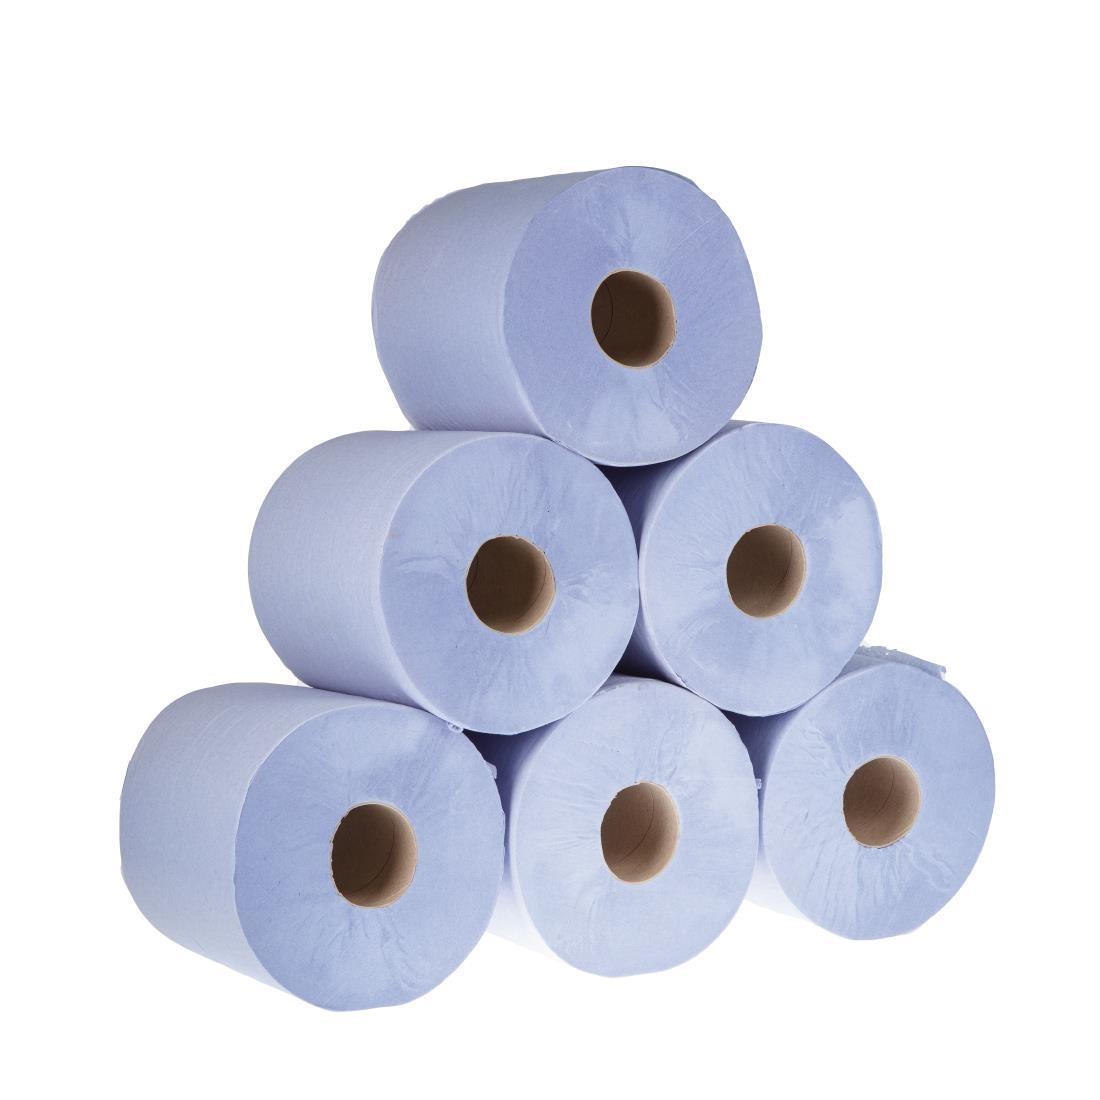 Jantex Blue Centrefeed Rolls 1ply 300m (Pack of 6) - GD833  - 3